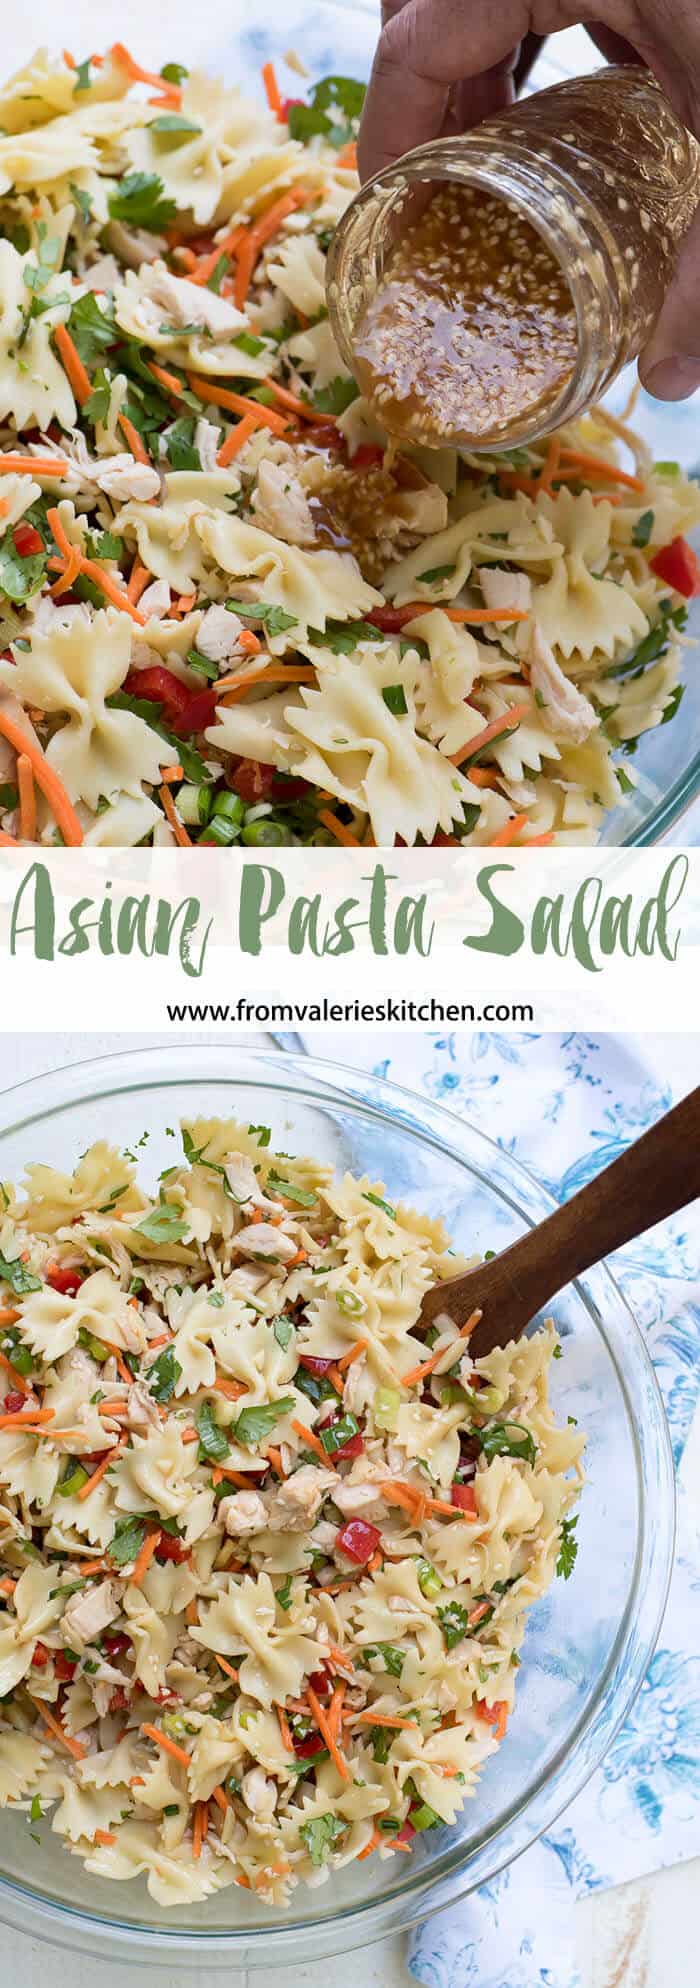 A small collage of the Asian Pasta Salad.